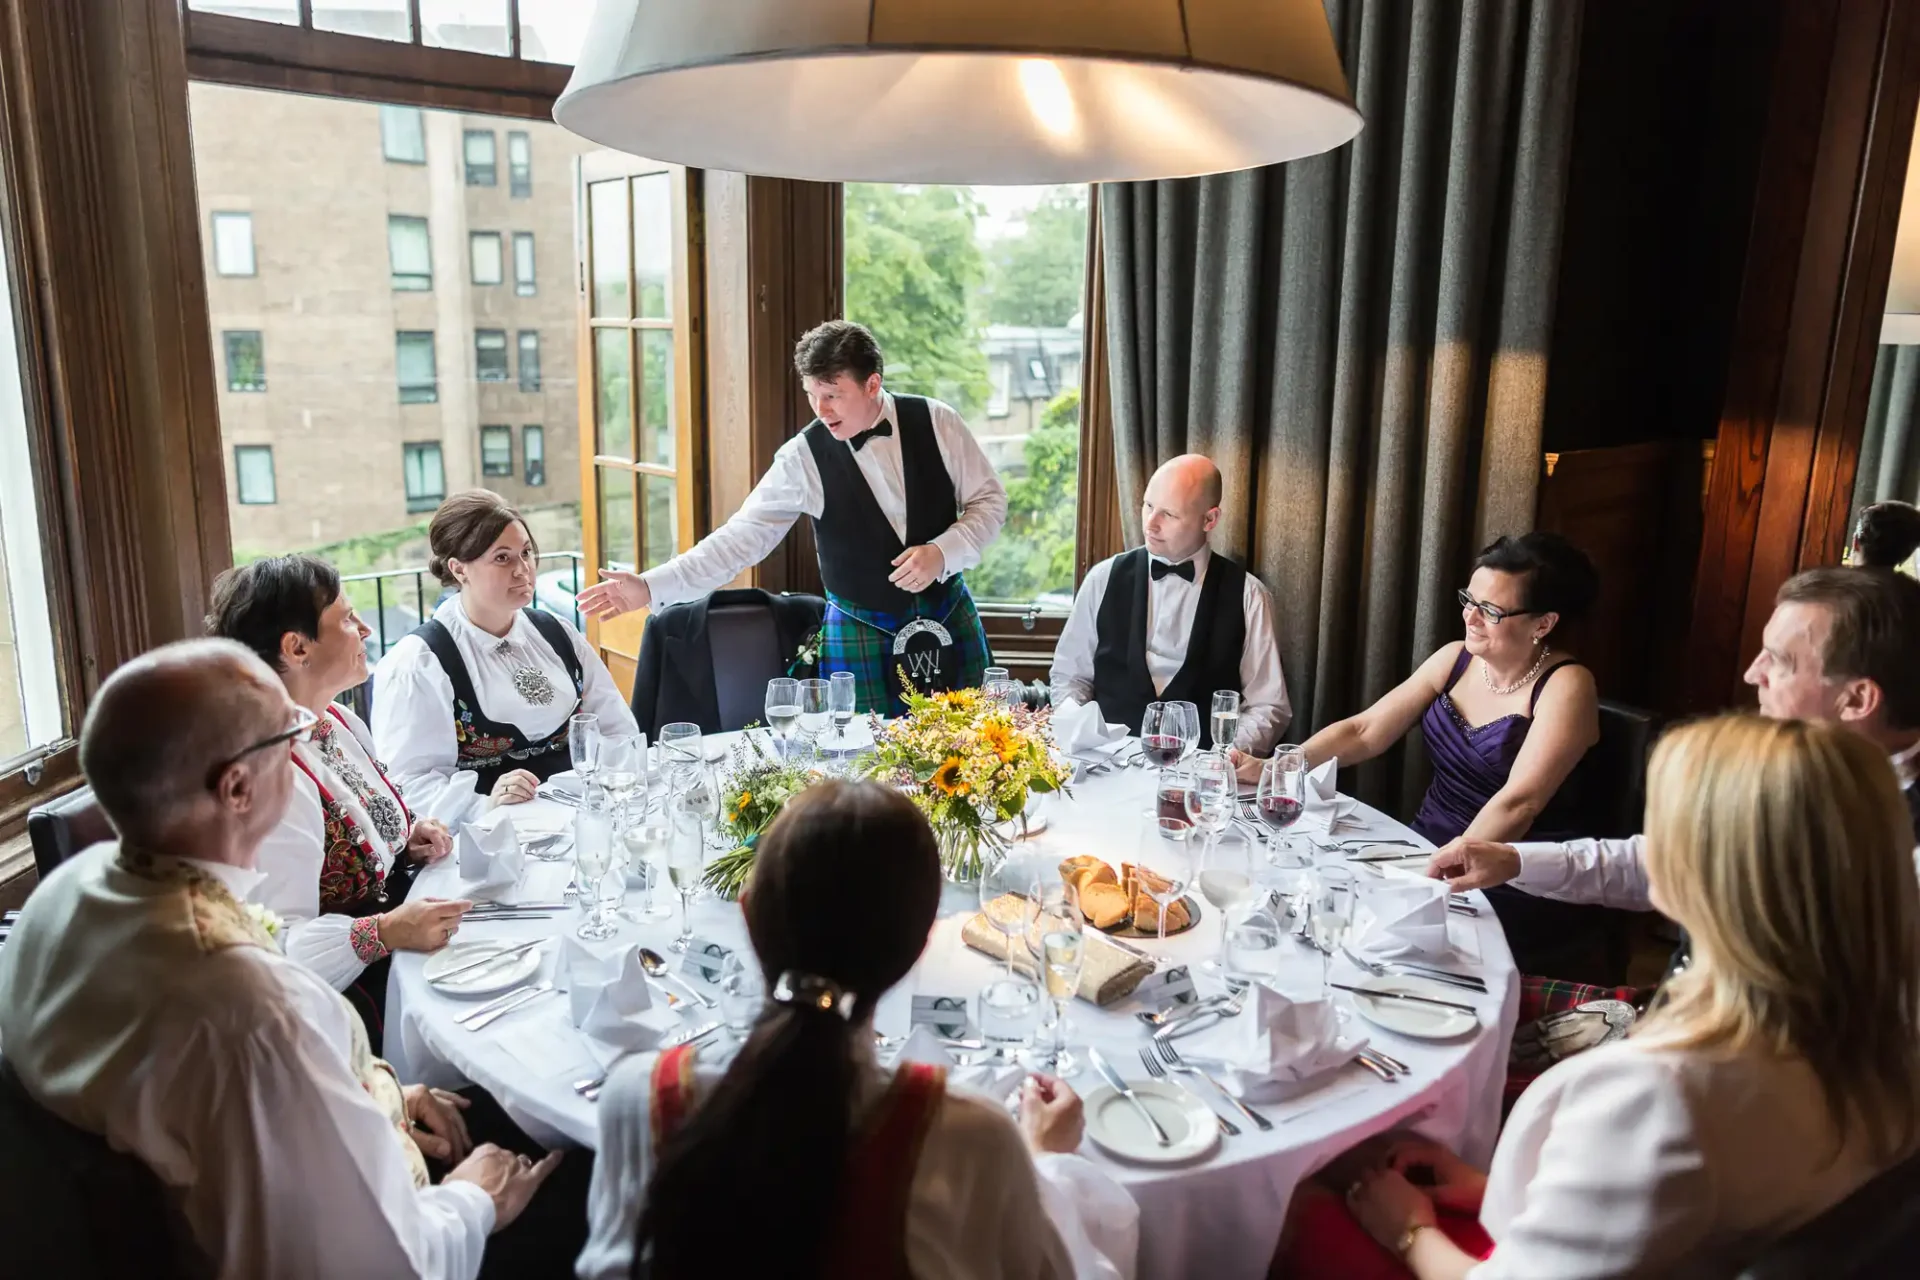 A waiter pours wine for a guest at a formal dining event surrounded by elegantly dressed people seated around a table adorned with flowers.